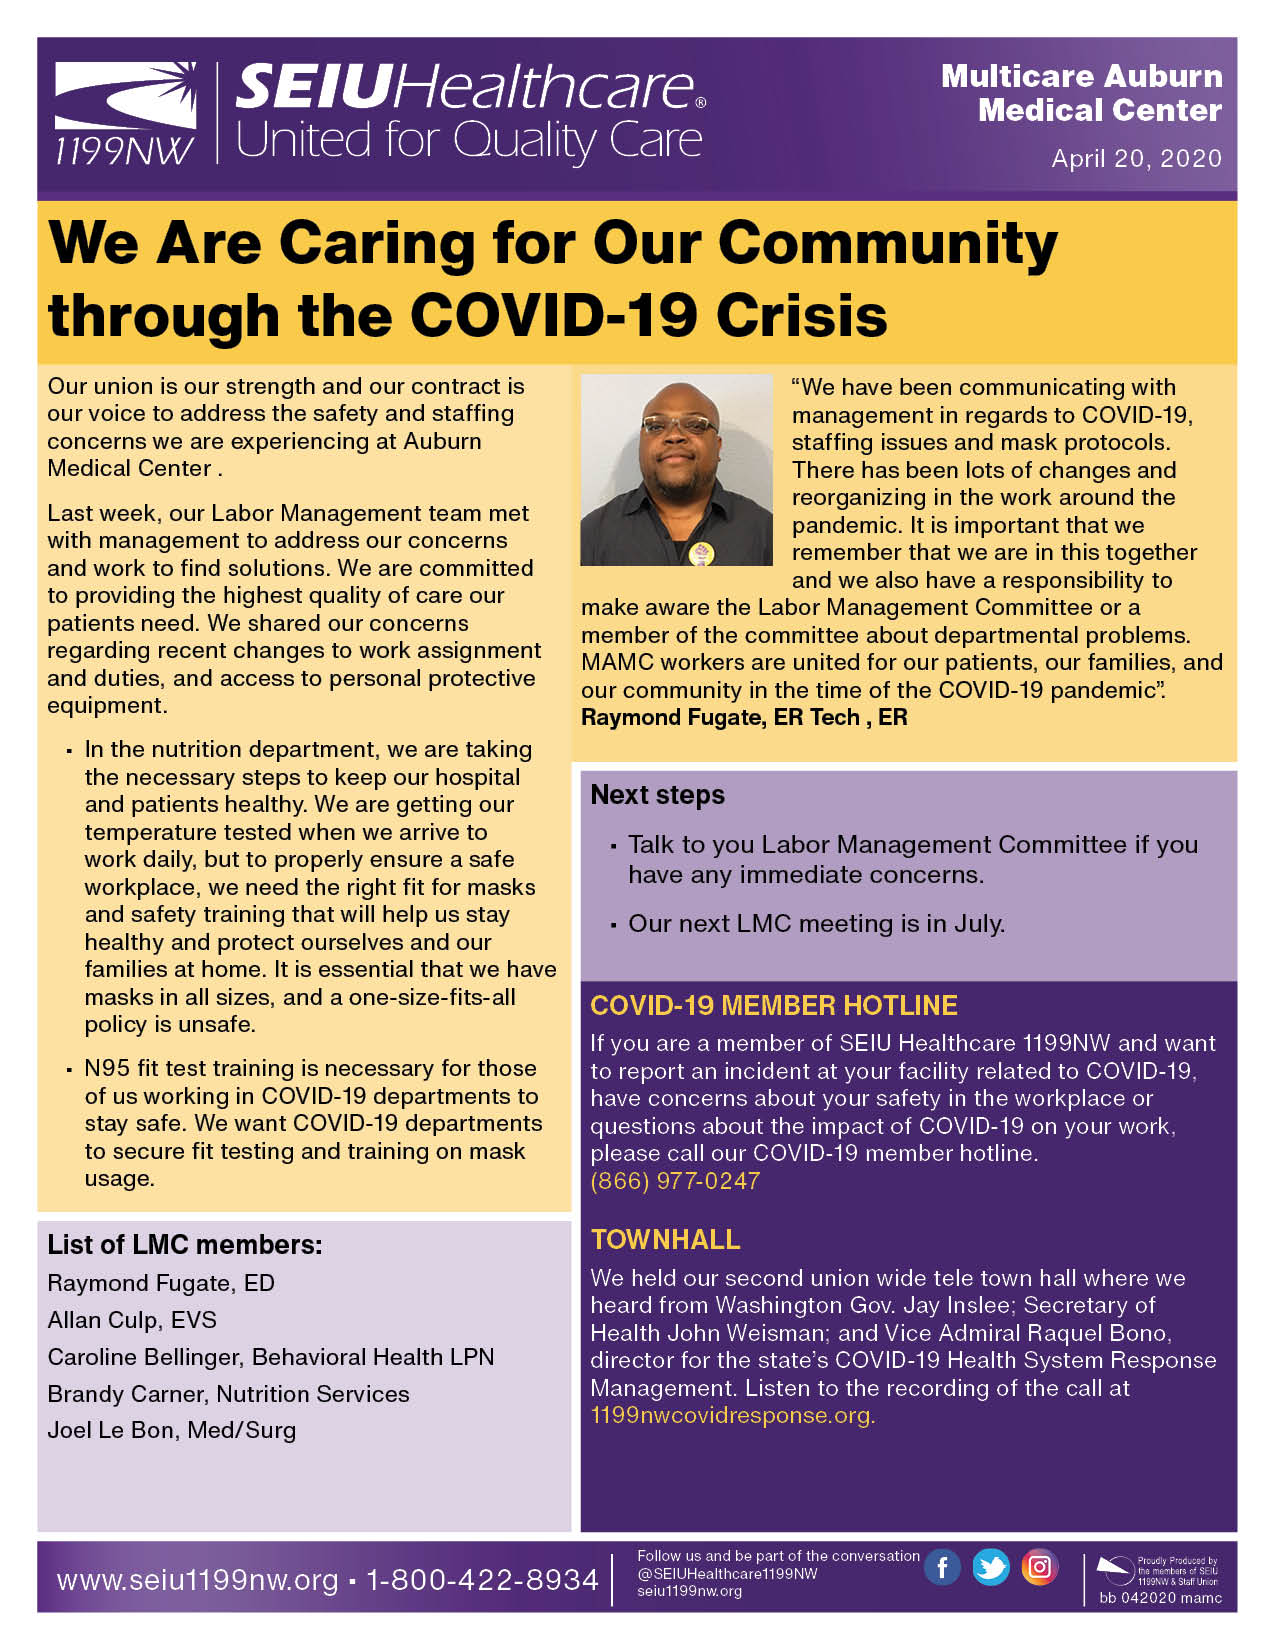 We Are Caring for Our Community through the COVID-19 Crisis